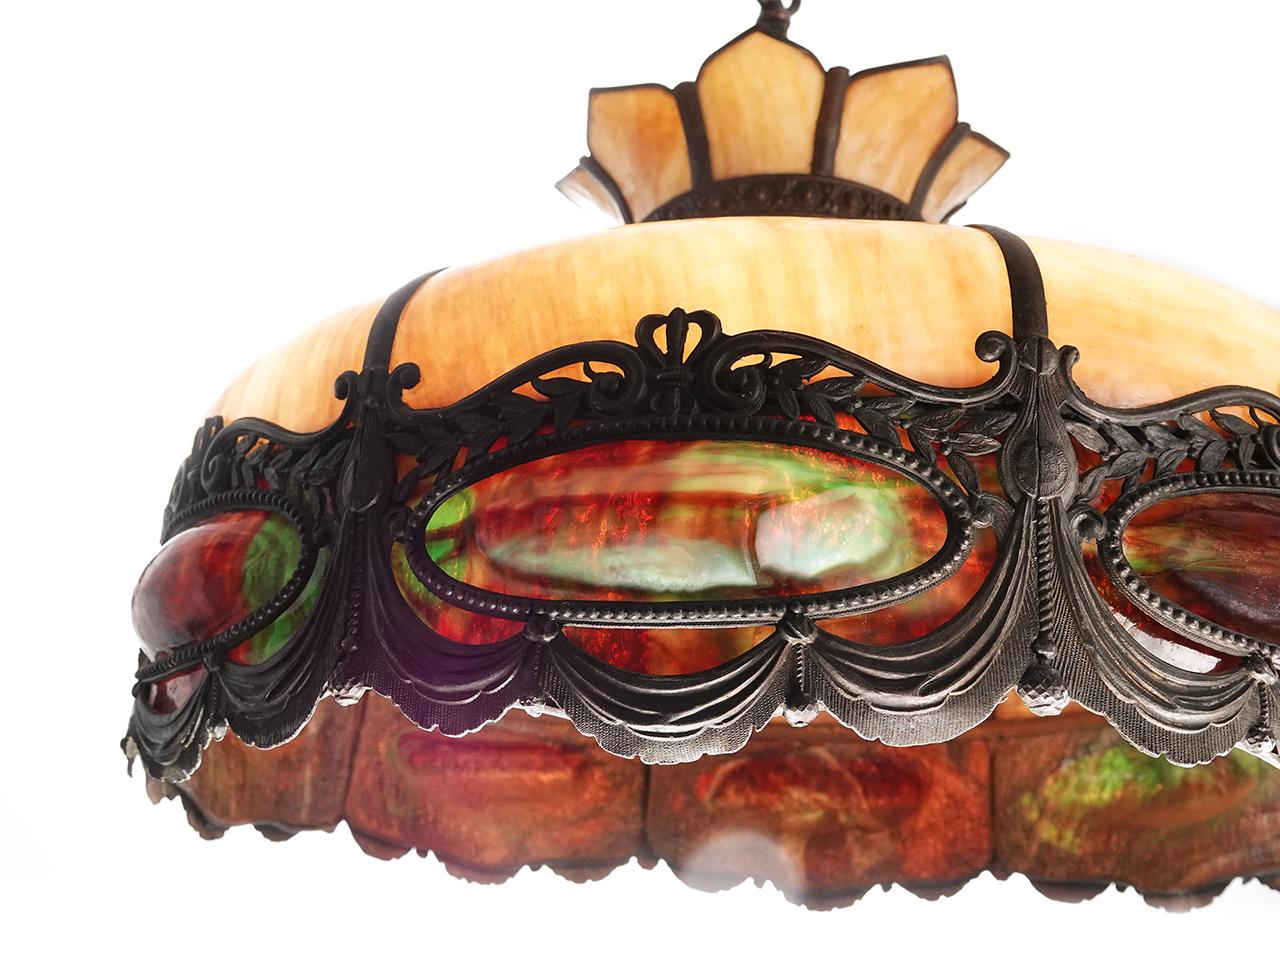 This is a large, impressive original stained slump glass chandelier. The top is a cream/white and the bubble curved medallions are multicolored wit a deep red and green.
This can be finished with chain to a drop length you require.